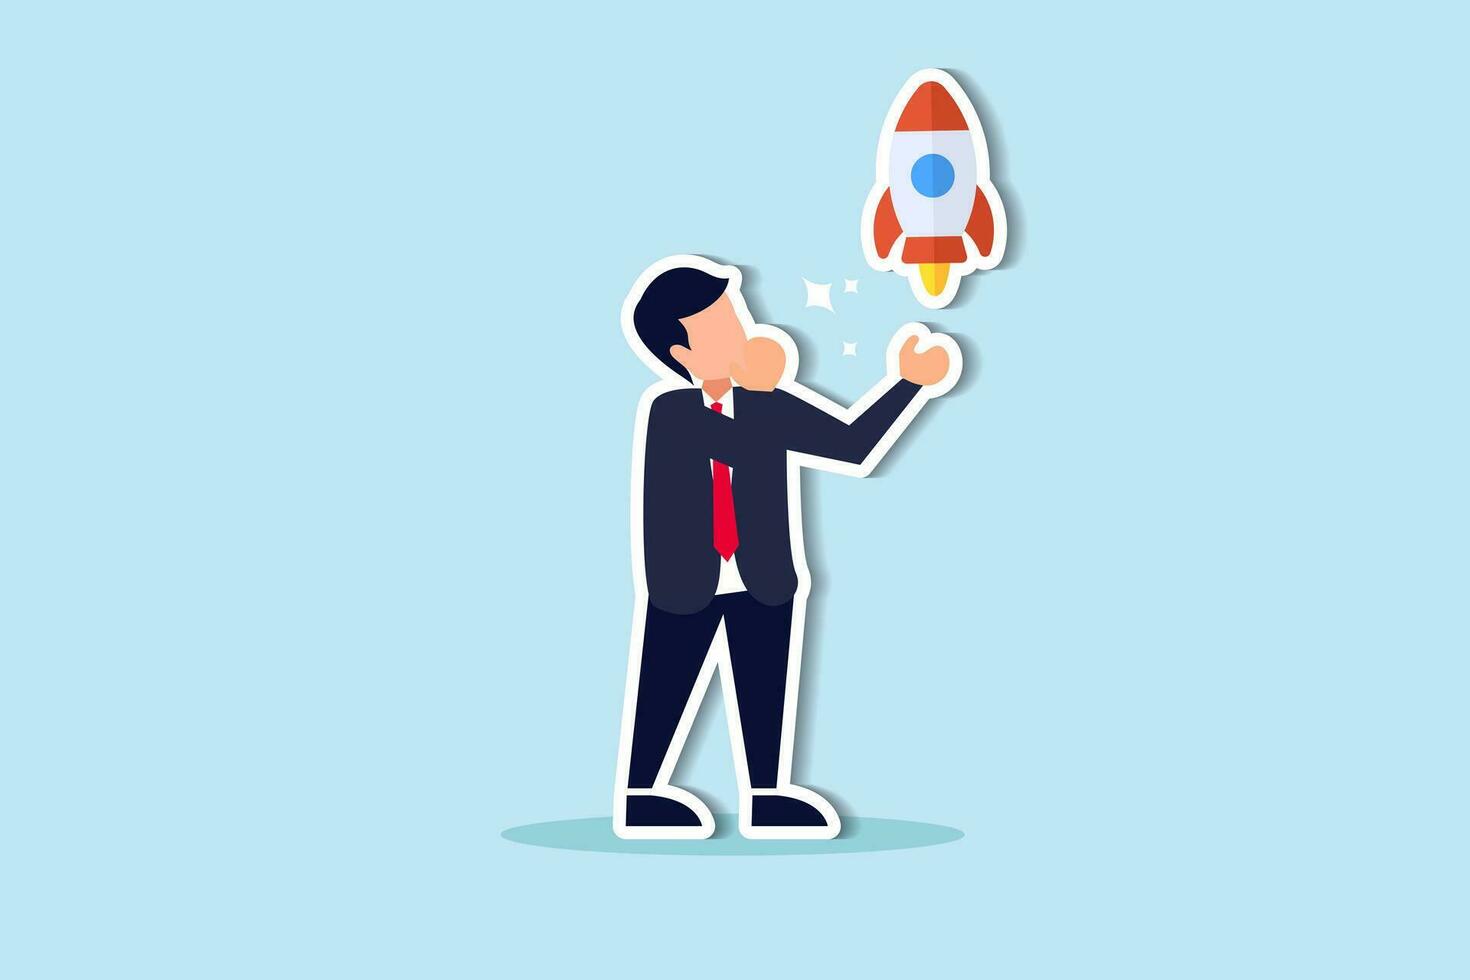 Entrepreneur and startup project, start new business or opportunity to invent new product, innovation or ambition to success concept, confidence businessman holding rocket project thinking for launch. vector